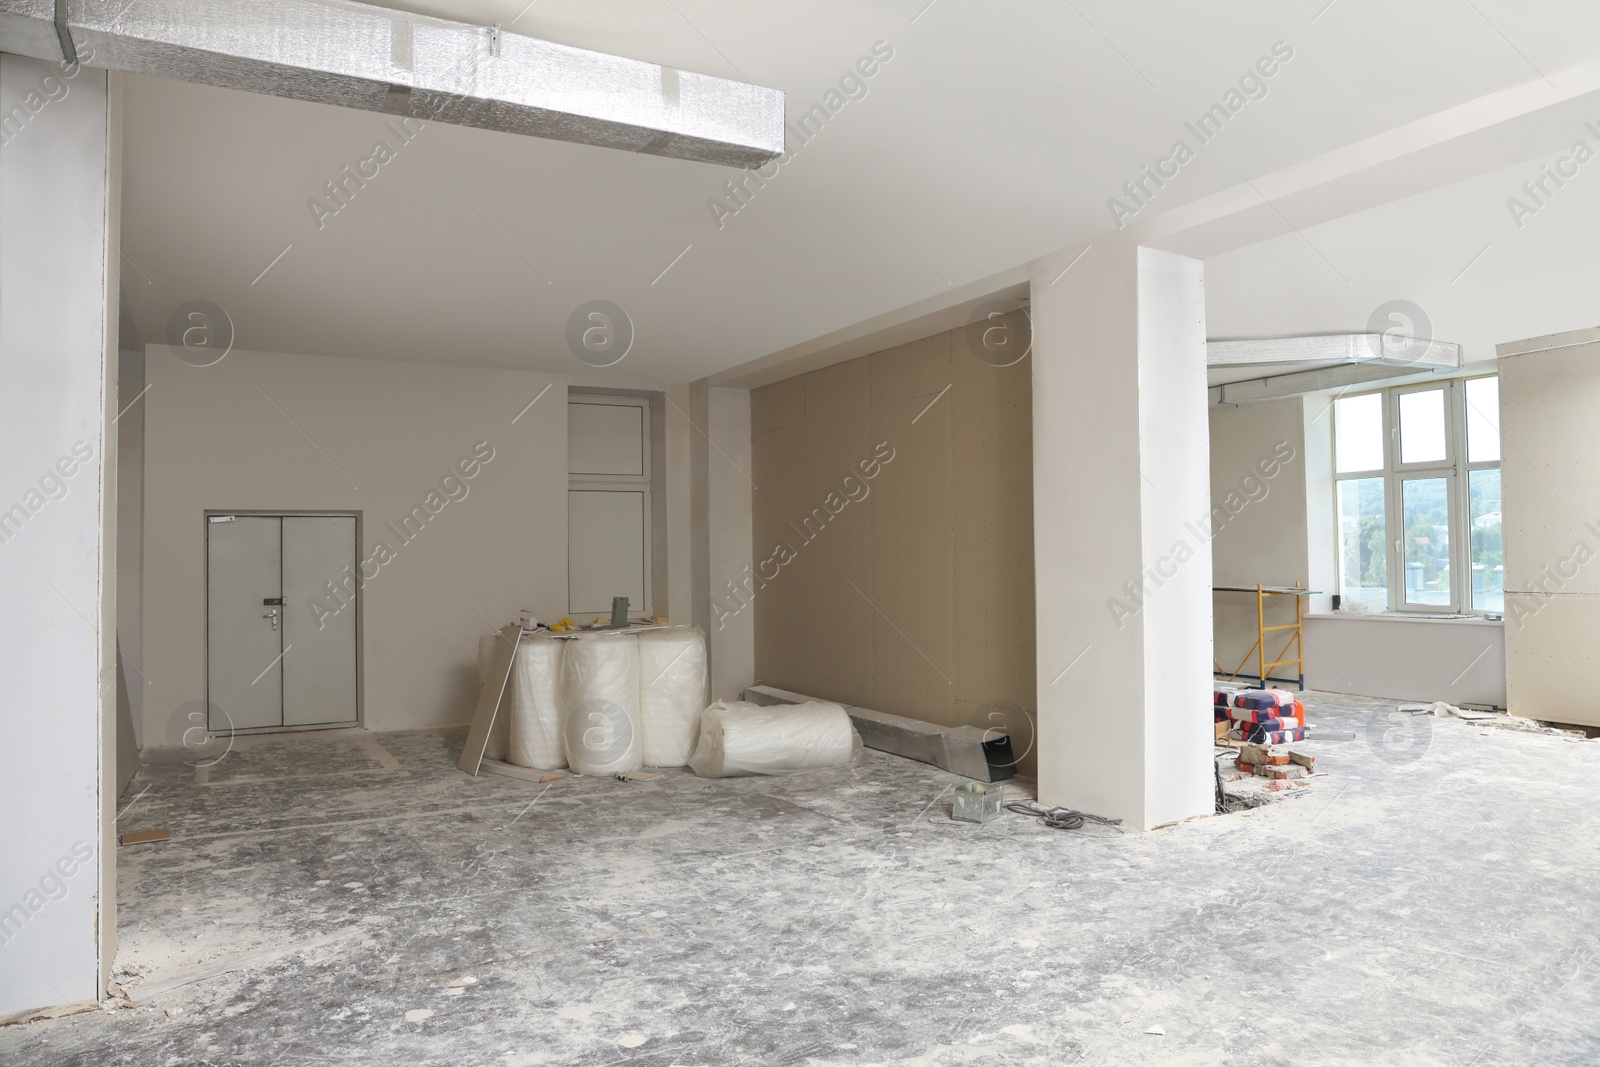 Photo of Room in apartment during repair. Home renovation